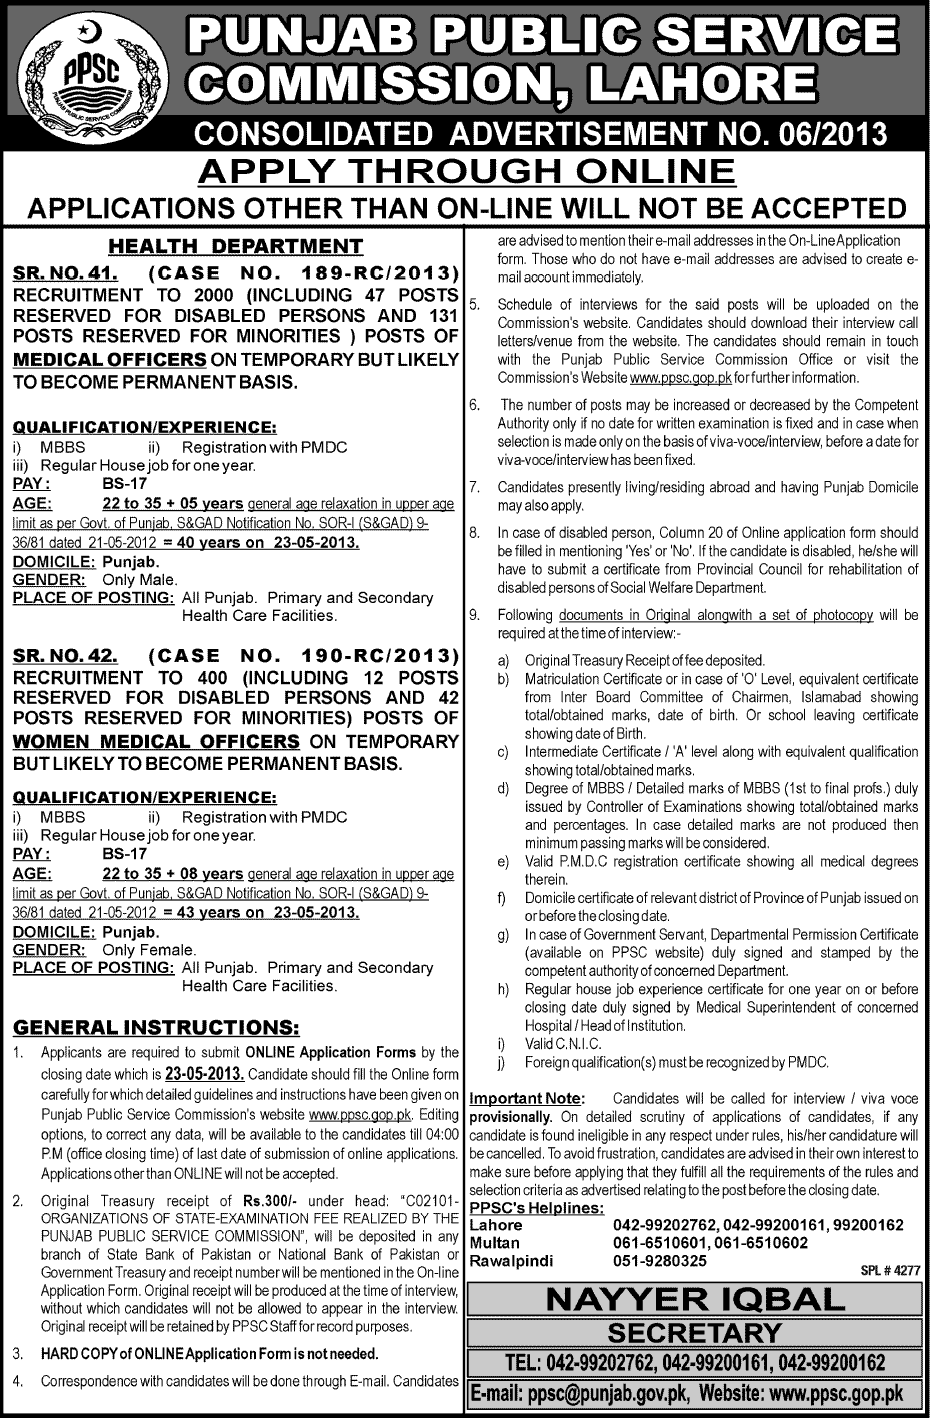 Women Medical Officer Jobs PPSC 2013-May-01 Lady Doctors WMO Latest Advertisement in Jang